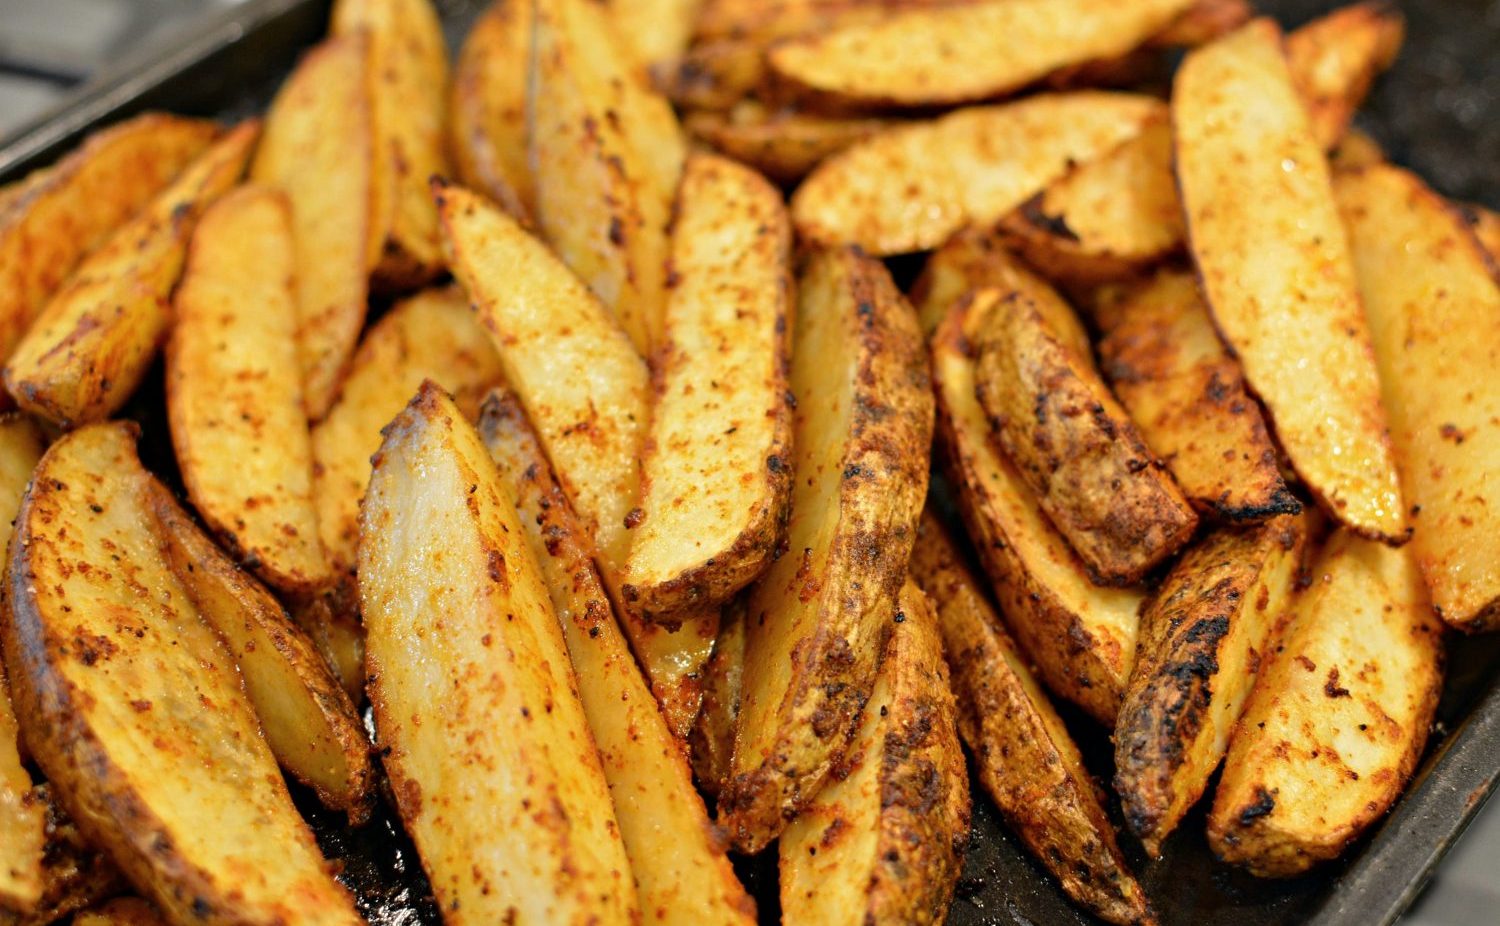 🥔 Can We Guess Your Generation Based on the Different Ways You’ve Eaten Potatoes? Potato wedges